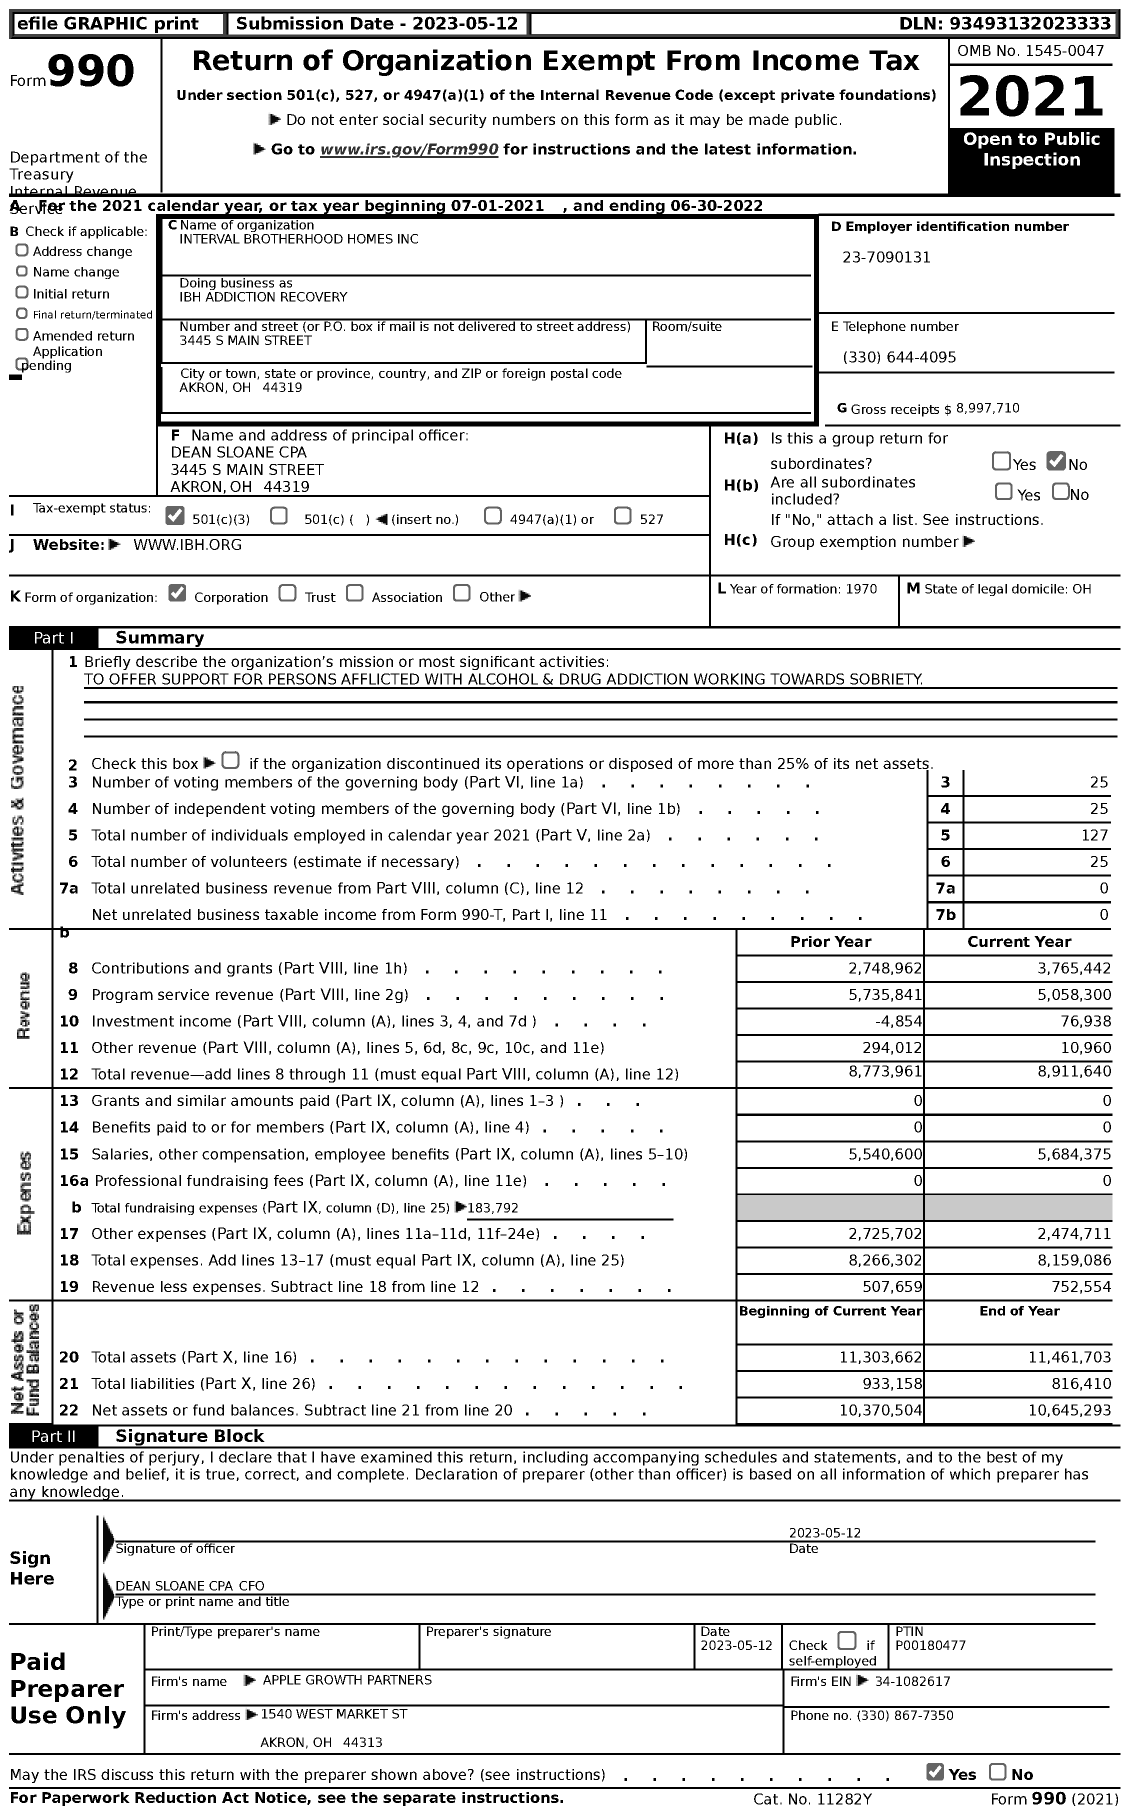 Image of first page of 2021 Form 990 for Ibh Addiction Recovery (IBH)